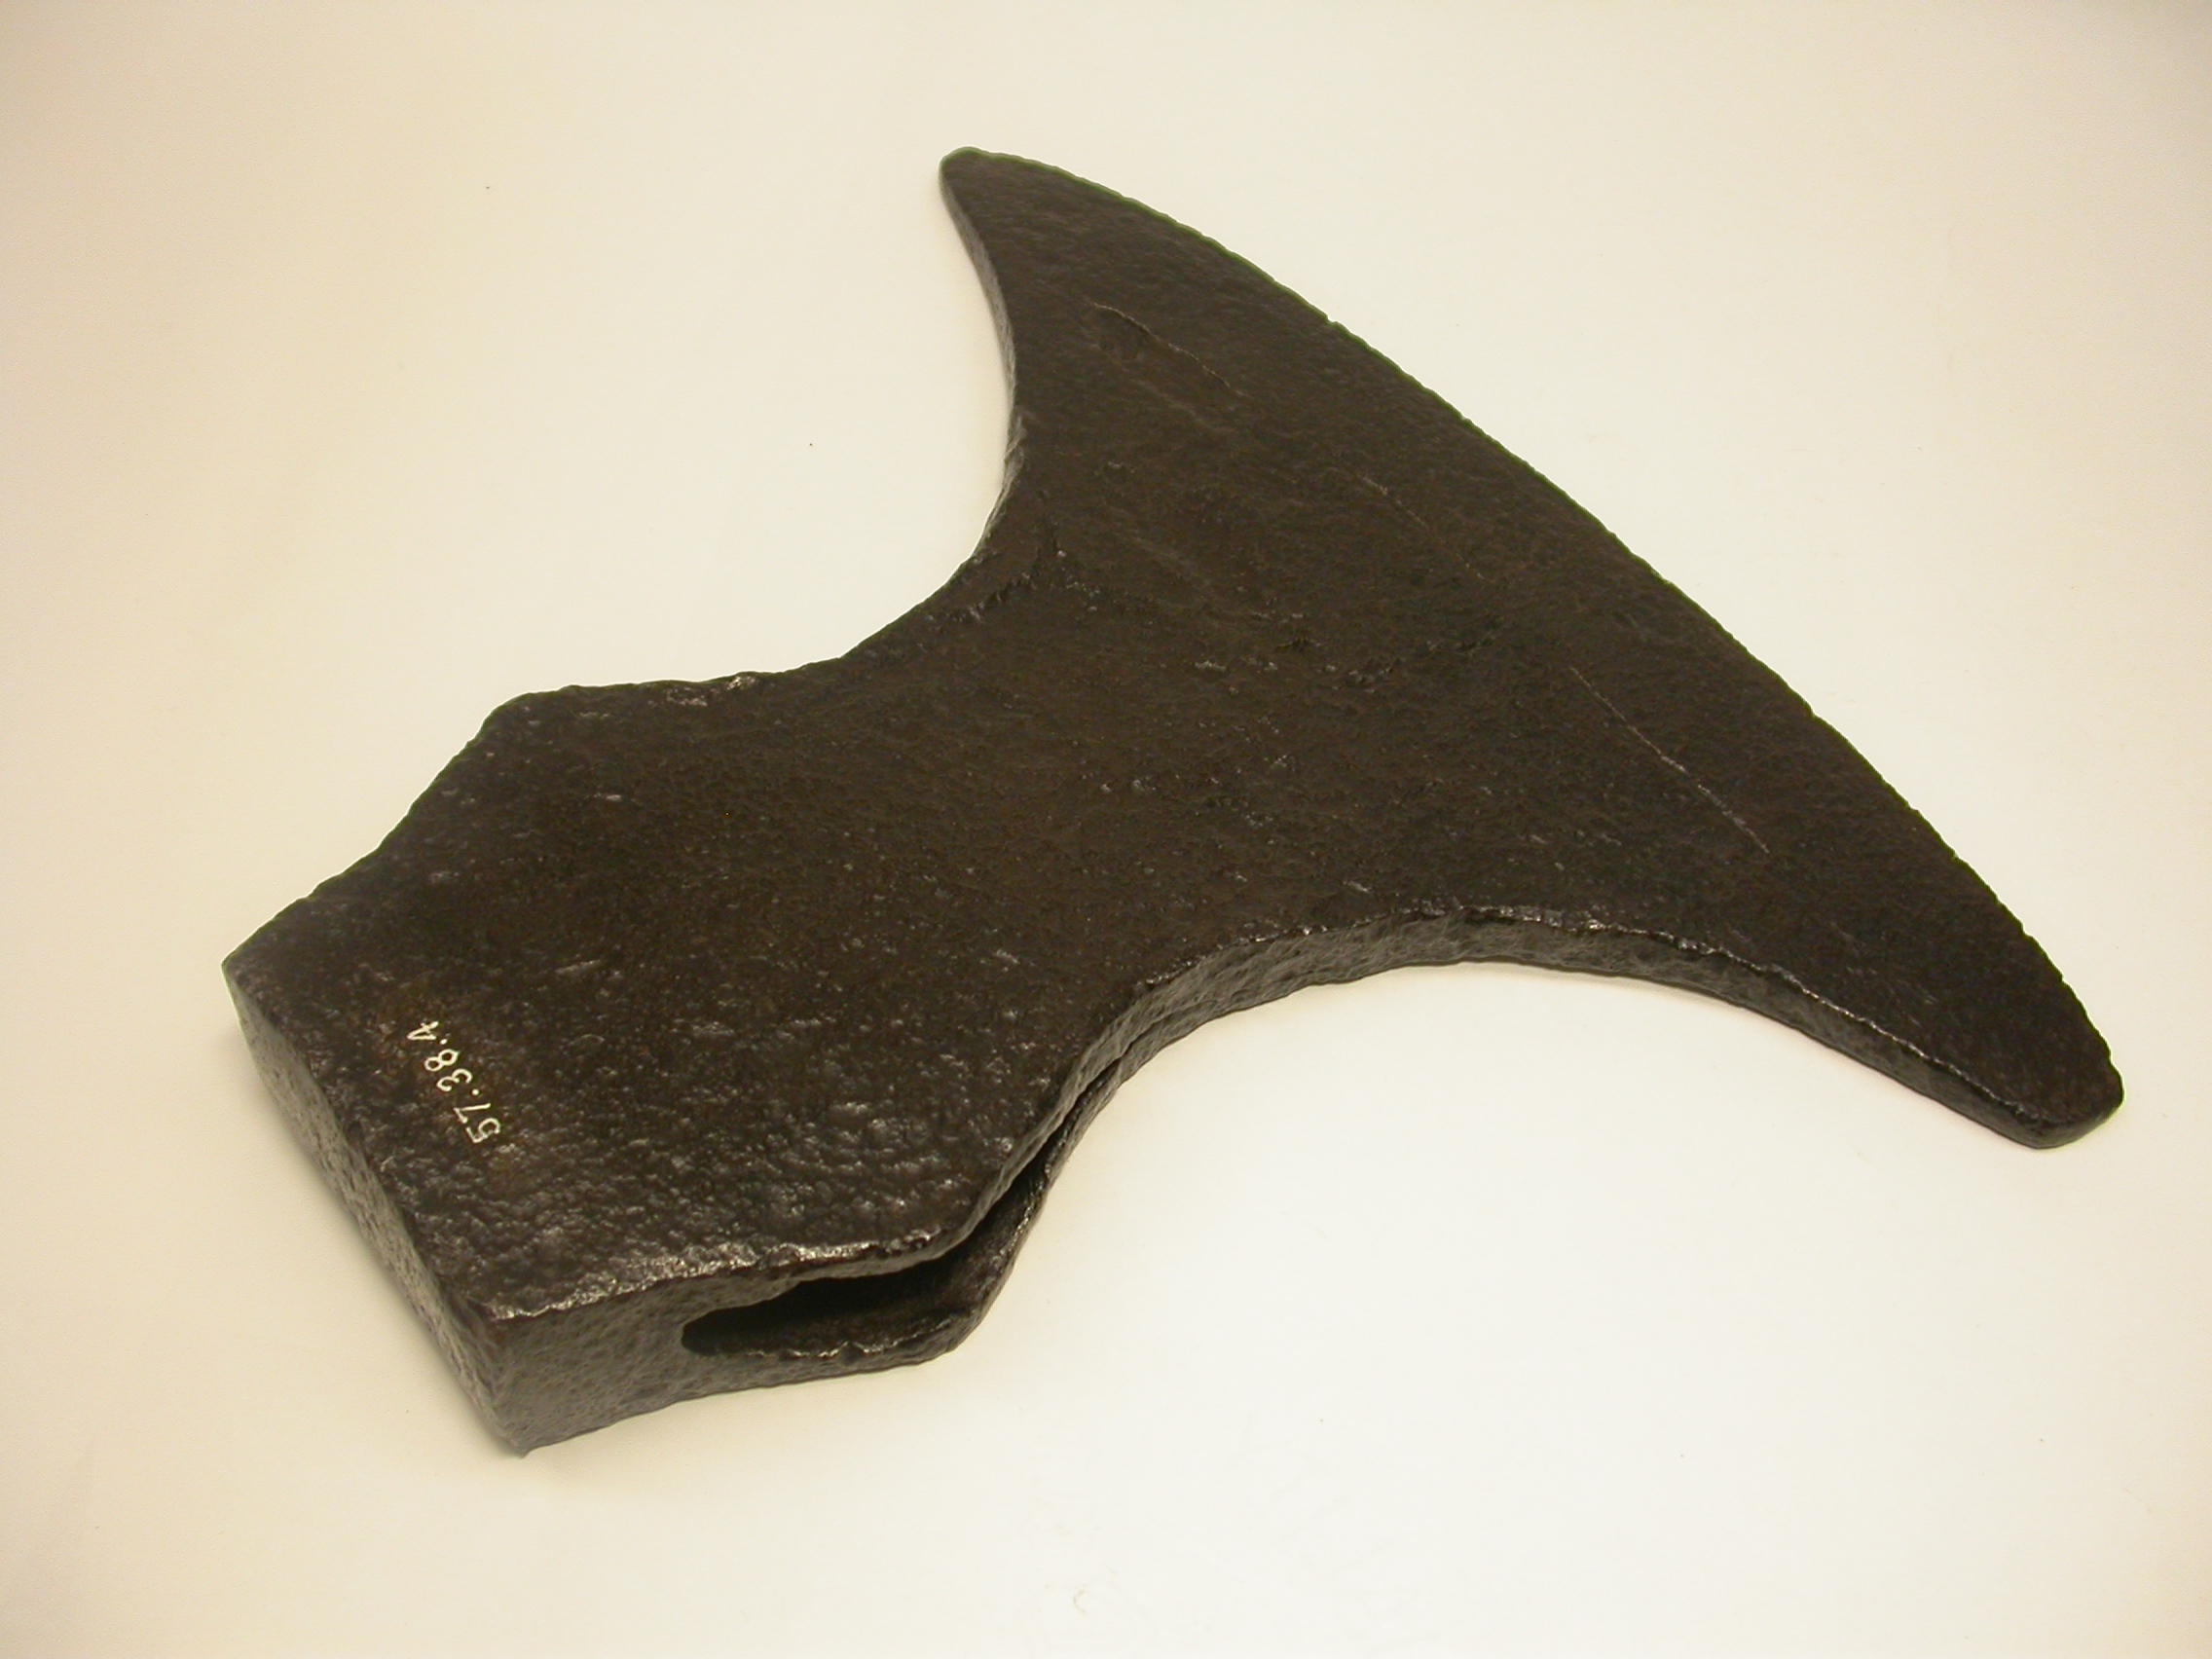 an%20iron%20broad%20axe%20with%20a%20chisel-edged%20blade